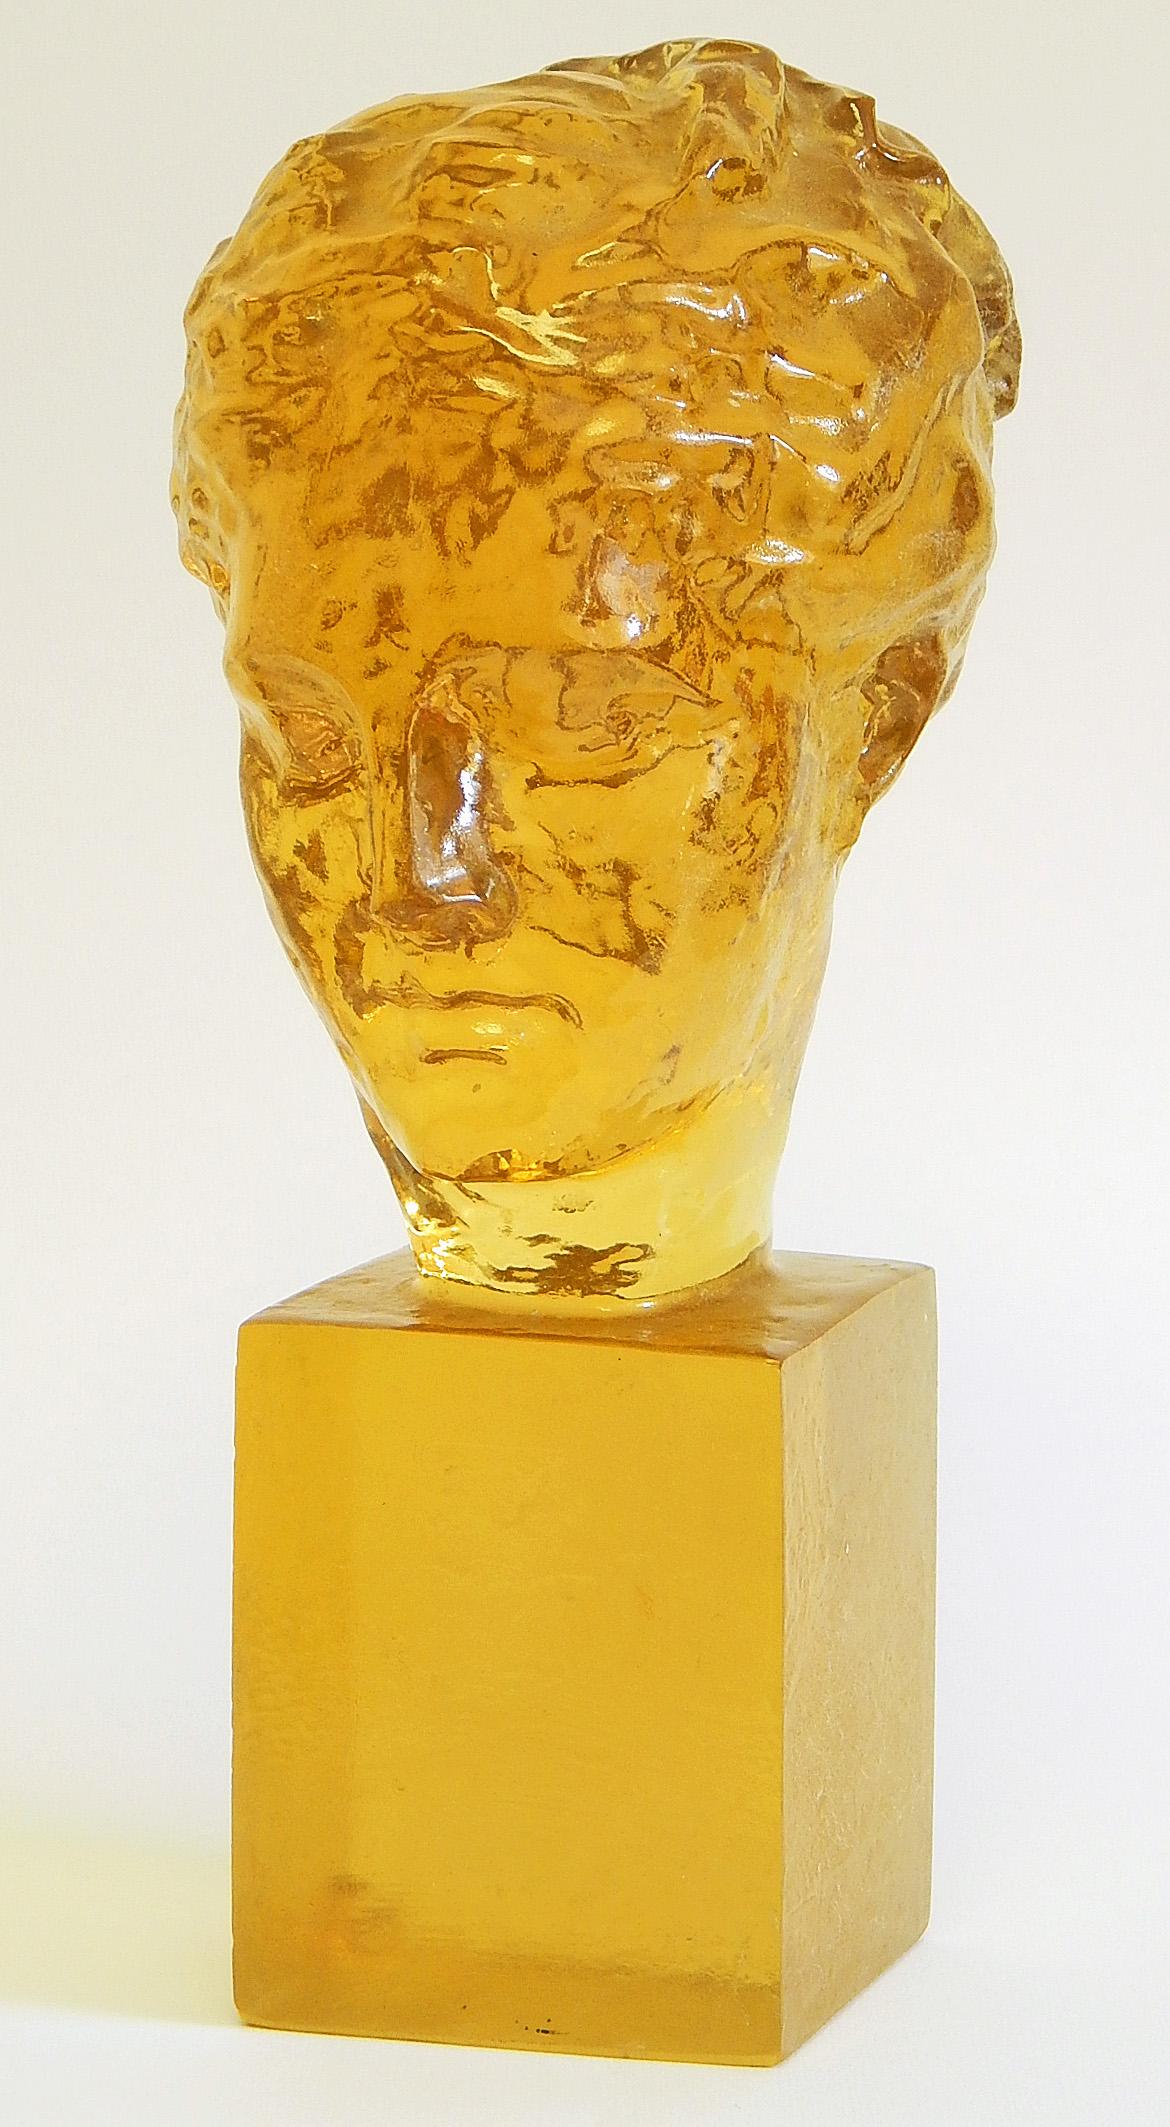 Translucent and glowing in a lovey shade of golden amber, this sculpture of an elegant woman's head was made by Dorothy Thorpe, one of the most prolific and important women designers in midcentury America. Based in Los Angeles, Thorpe designed sets